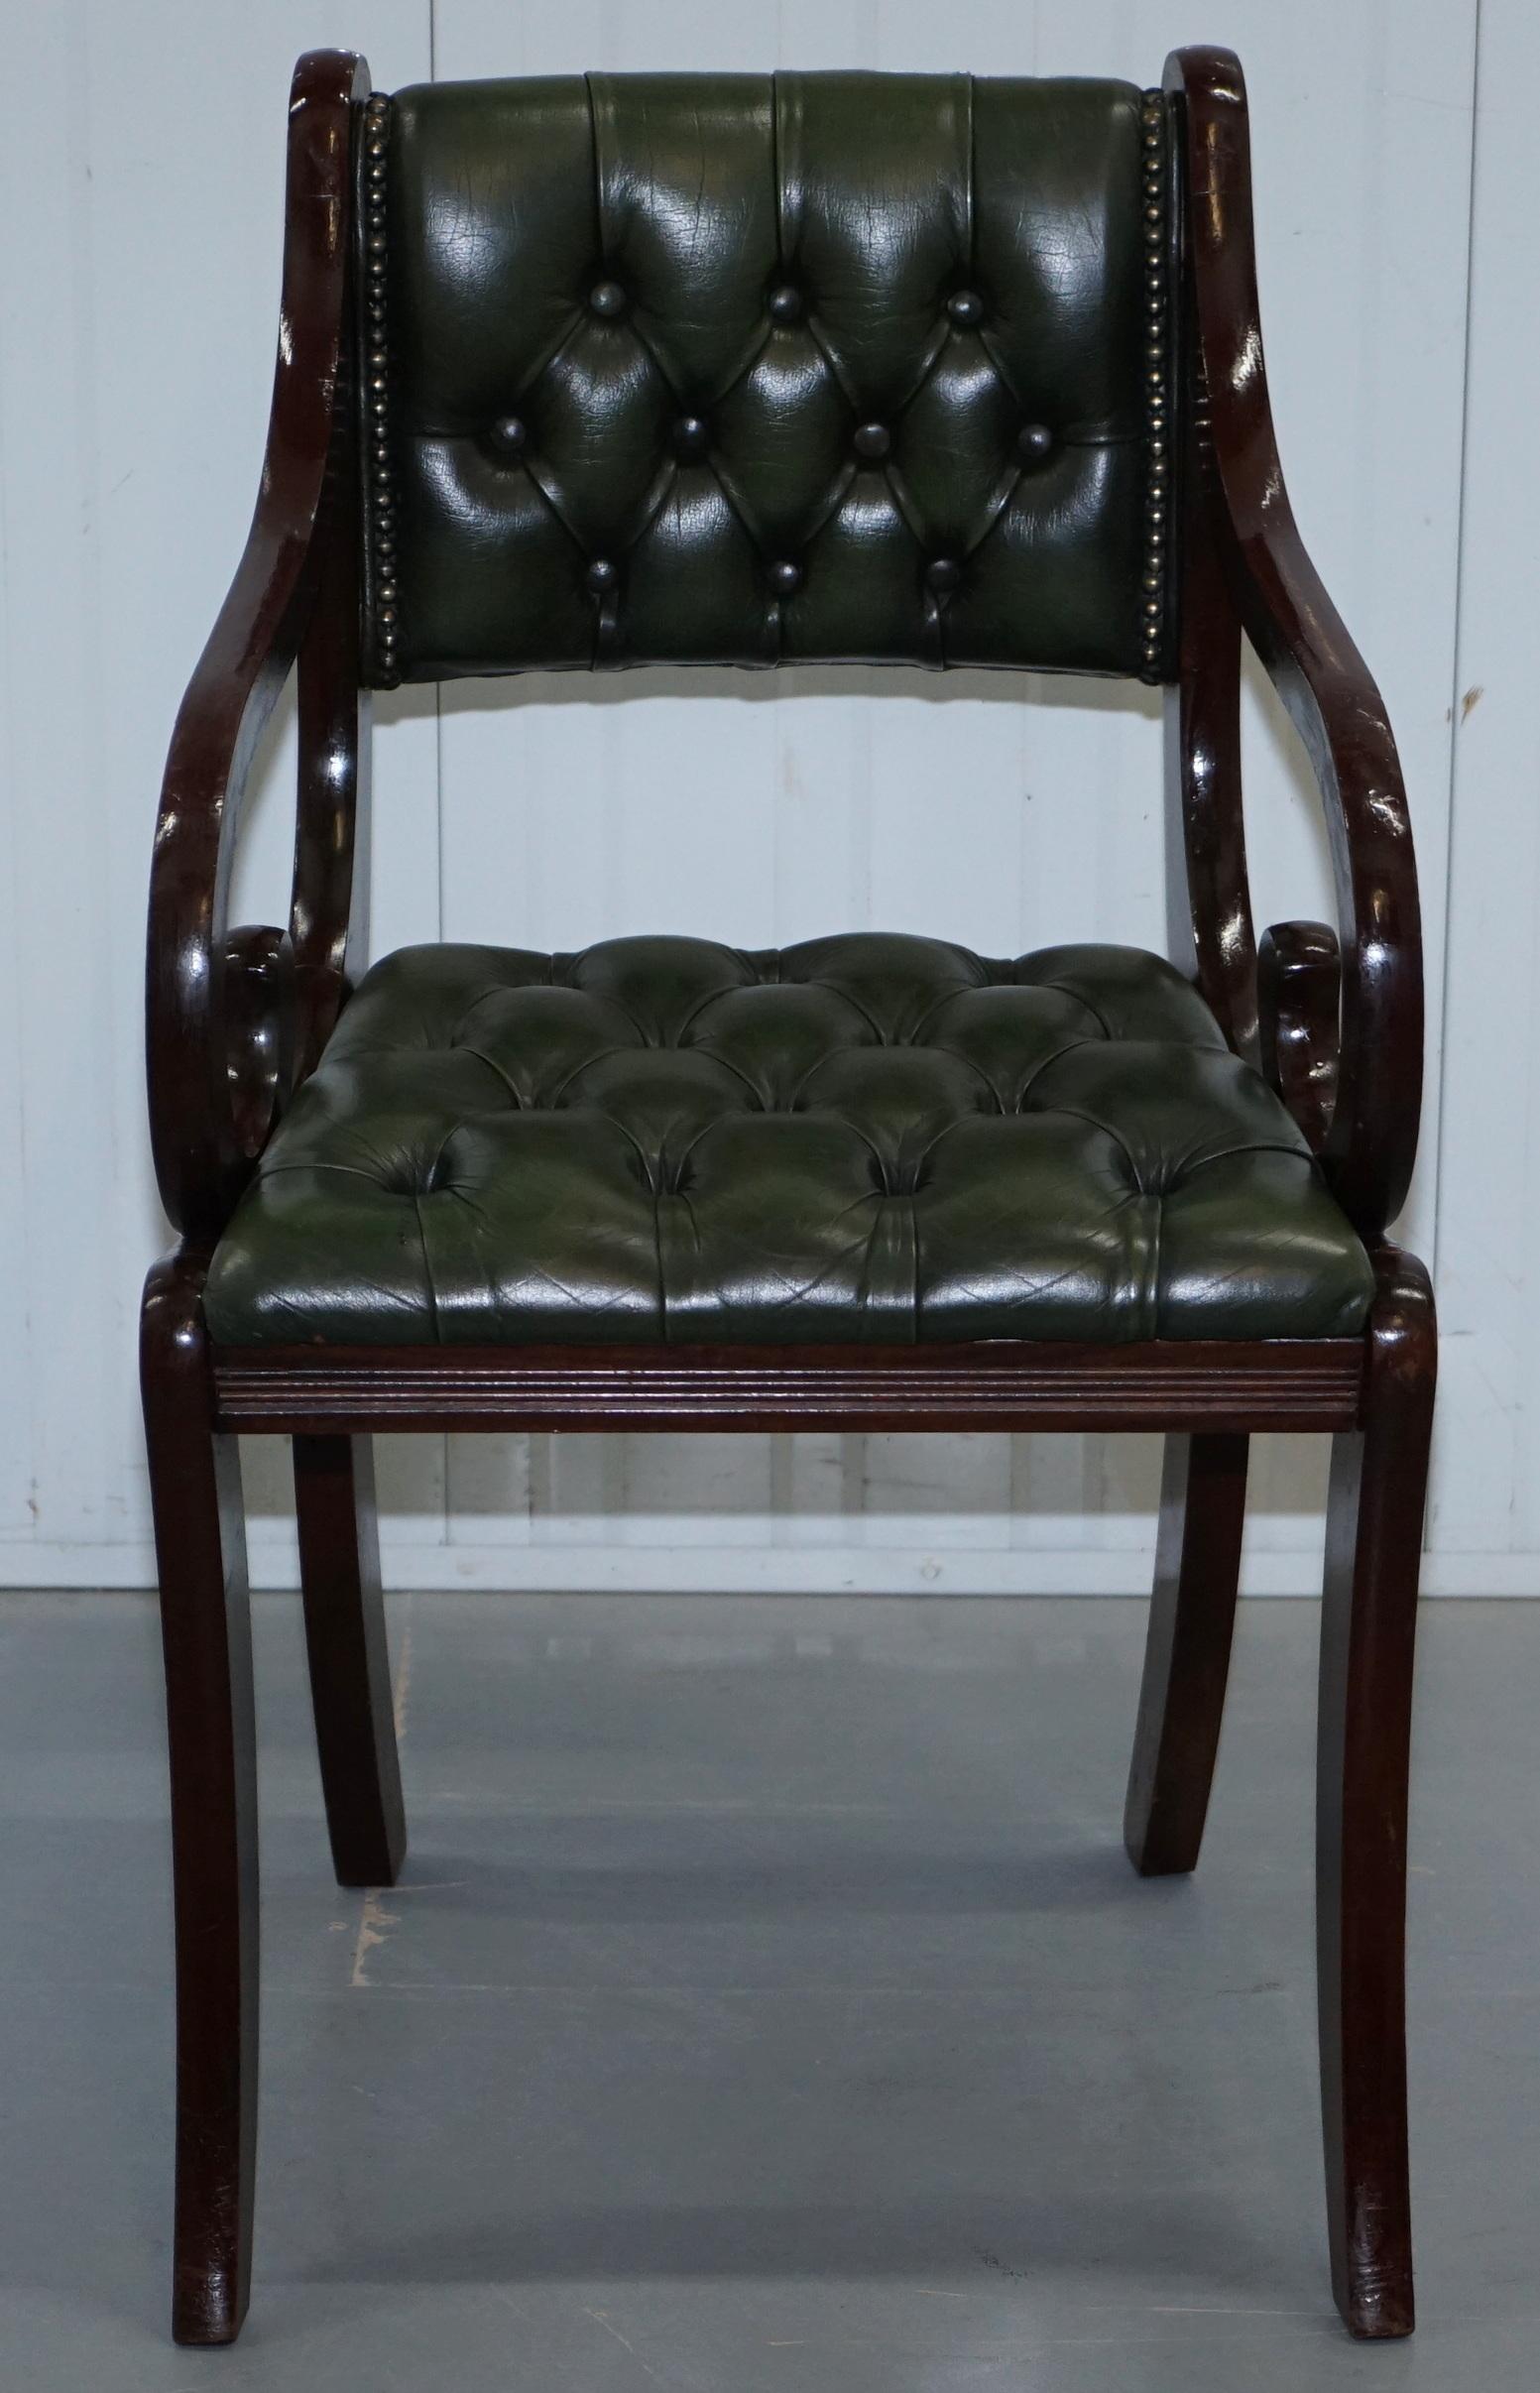 6 Mahogany Beresford & Hicks England Dining Chairs Chesterfield Leather Hide 5